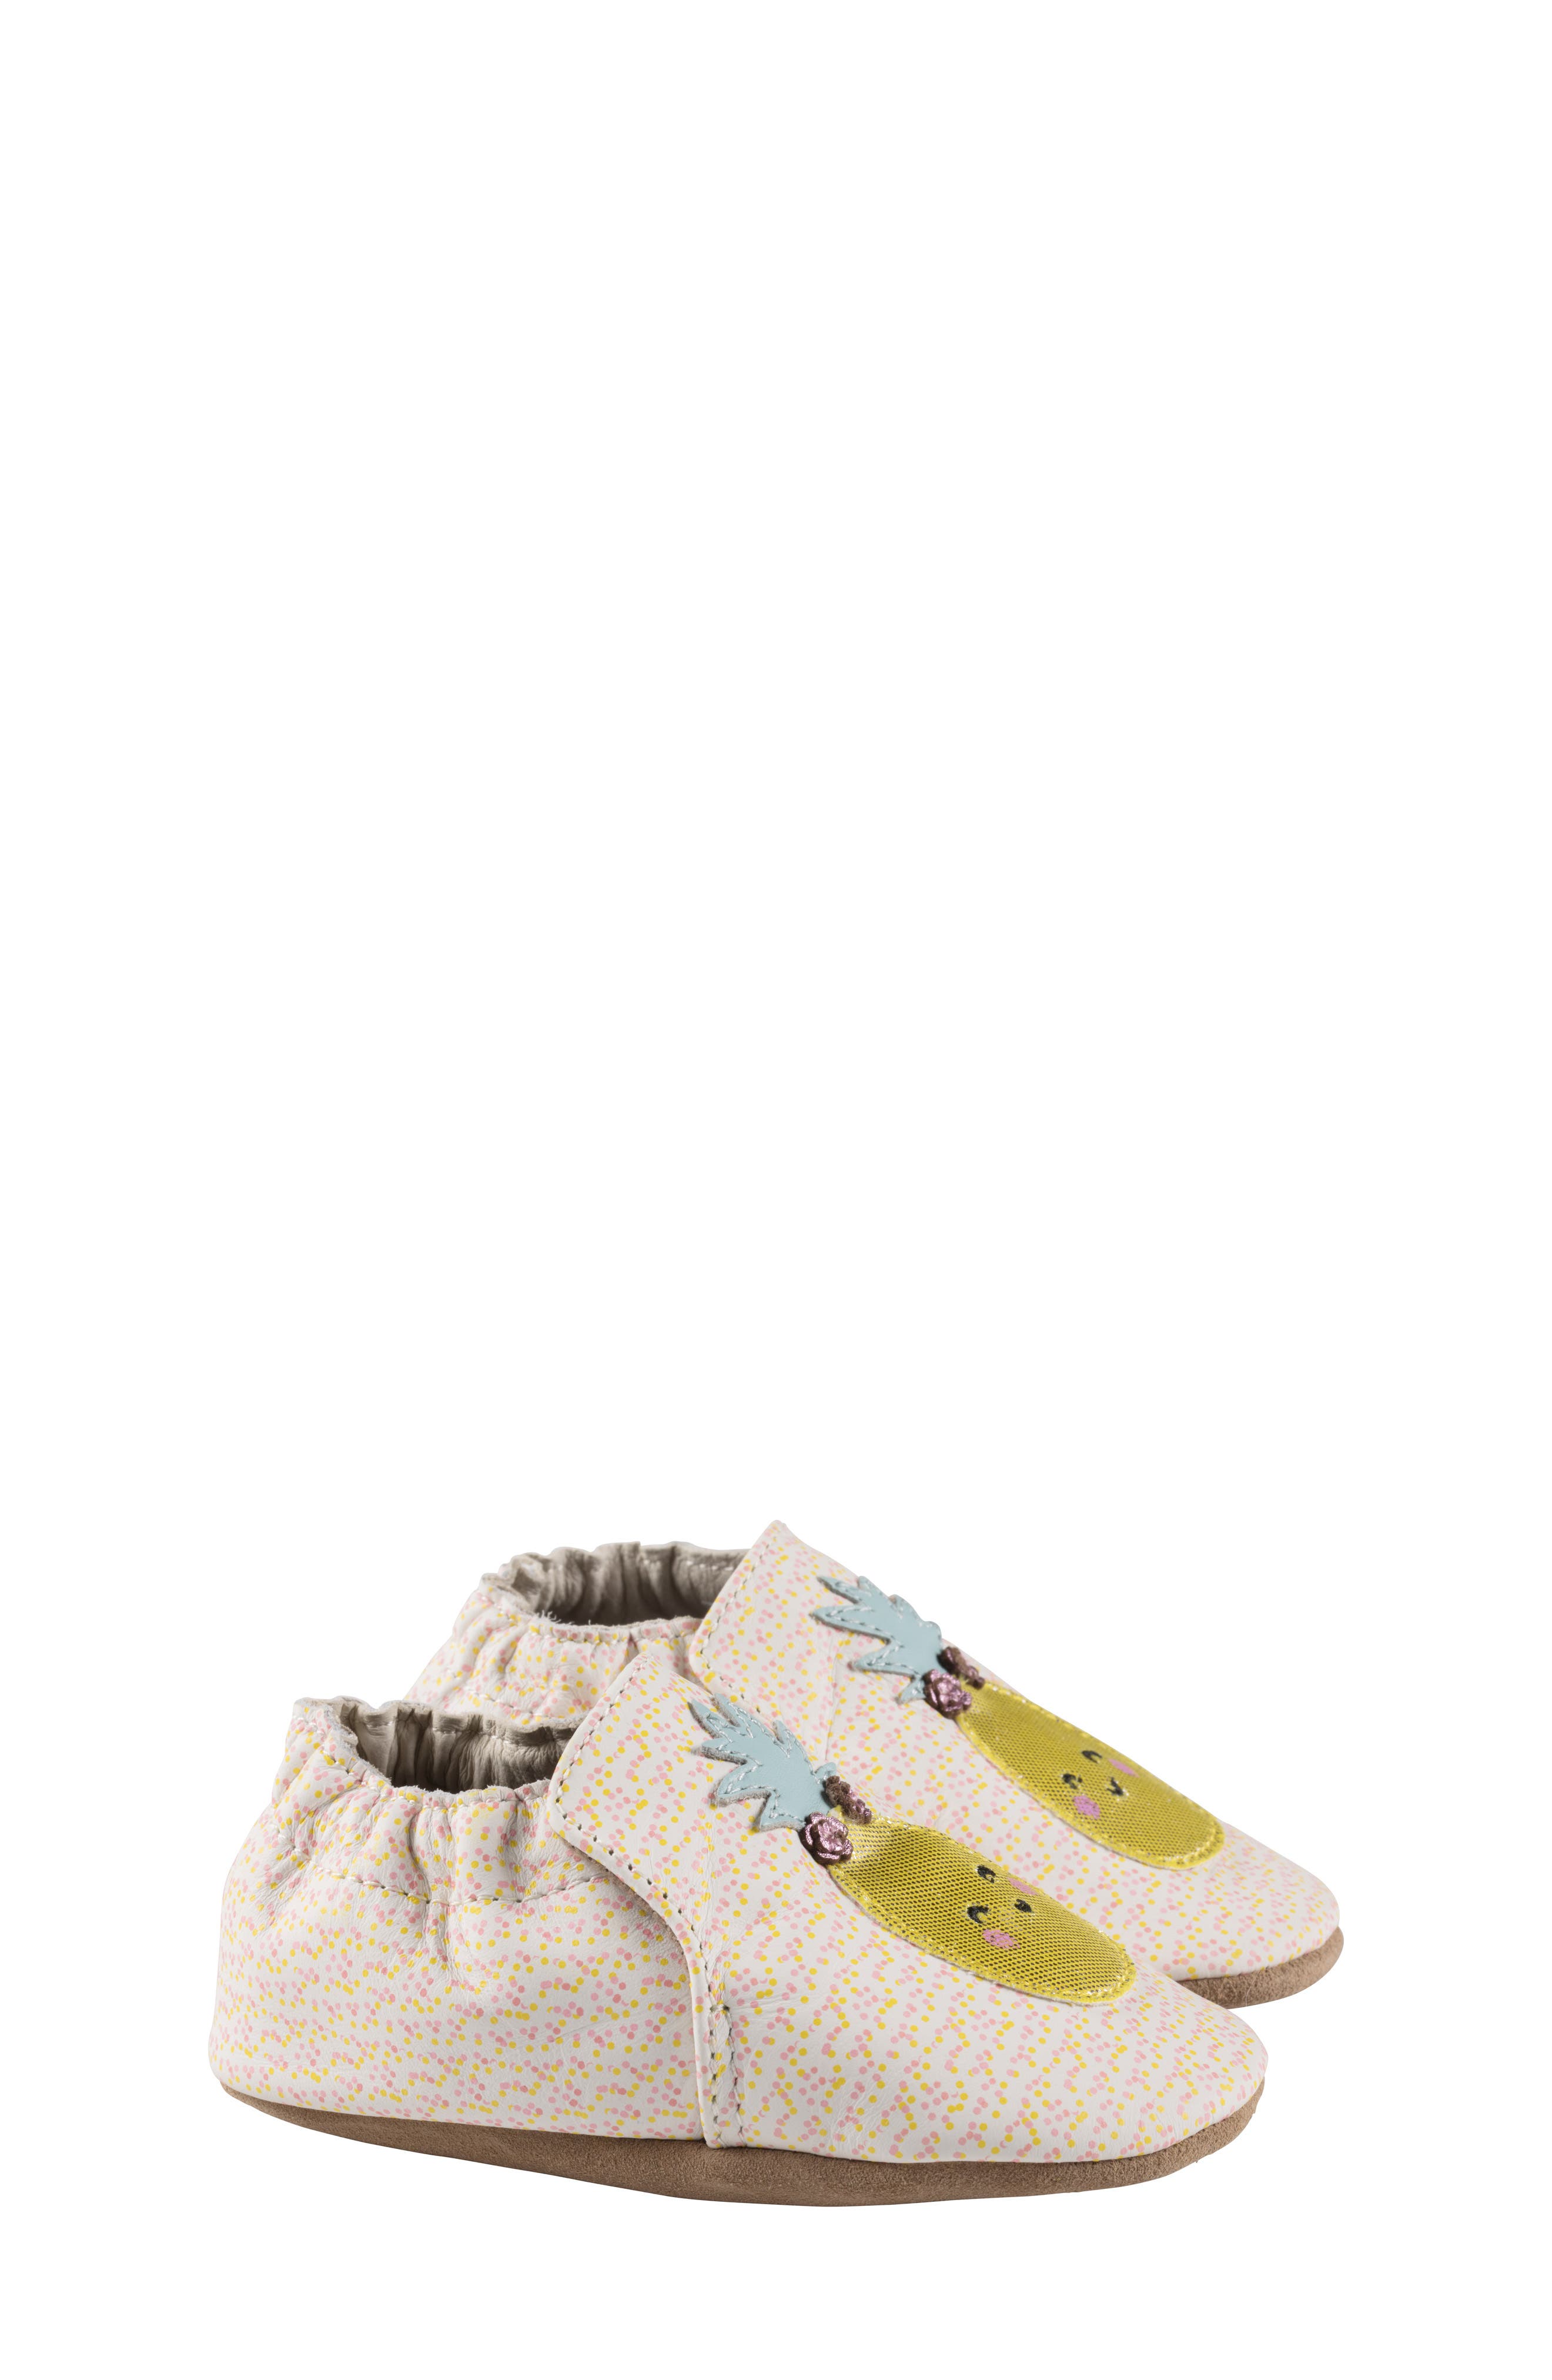 Robeez® Shoes for Babies | Nordstrom